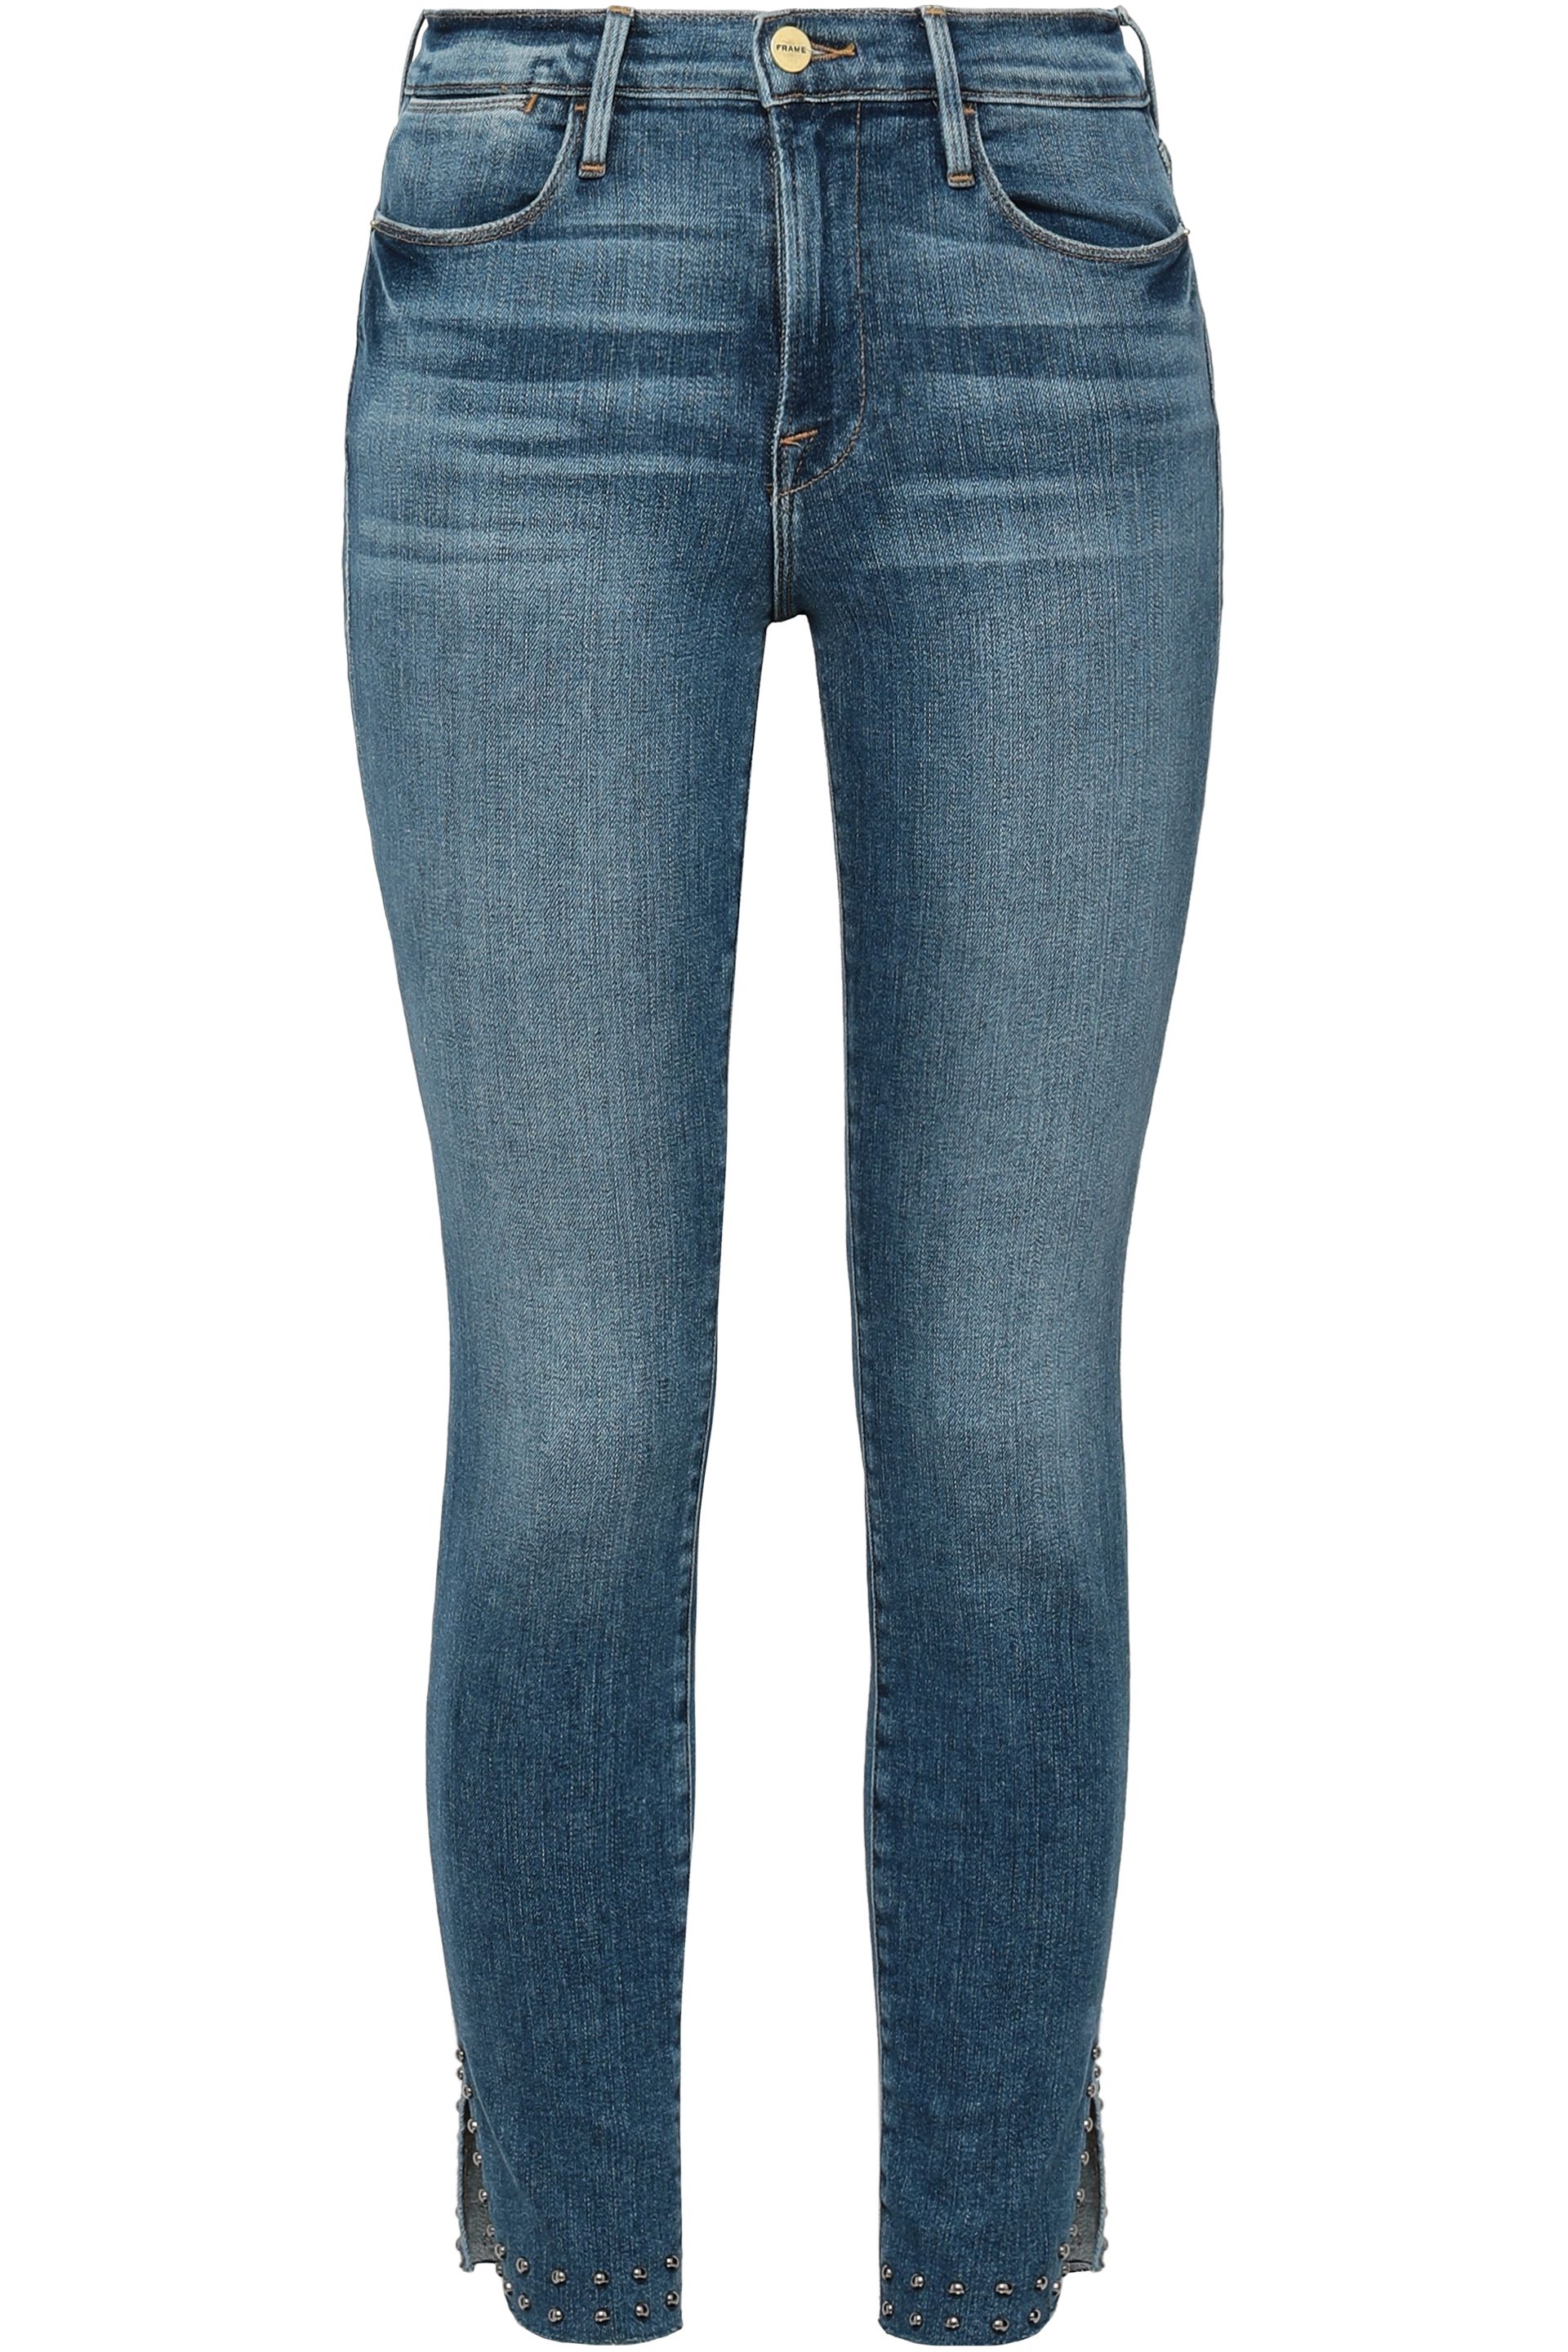 FRAME Denim & Clothing | Sale Up To 70% Off At THE OUTNET